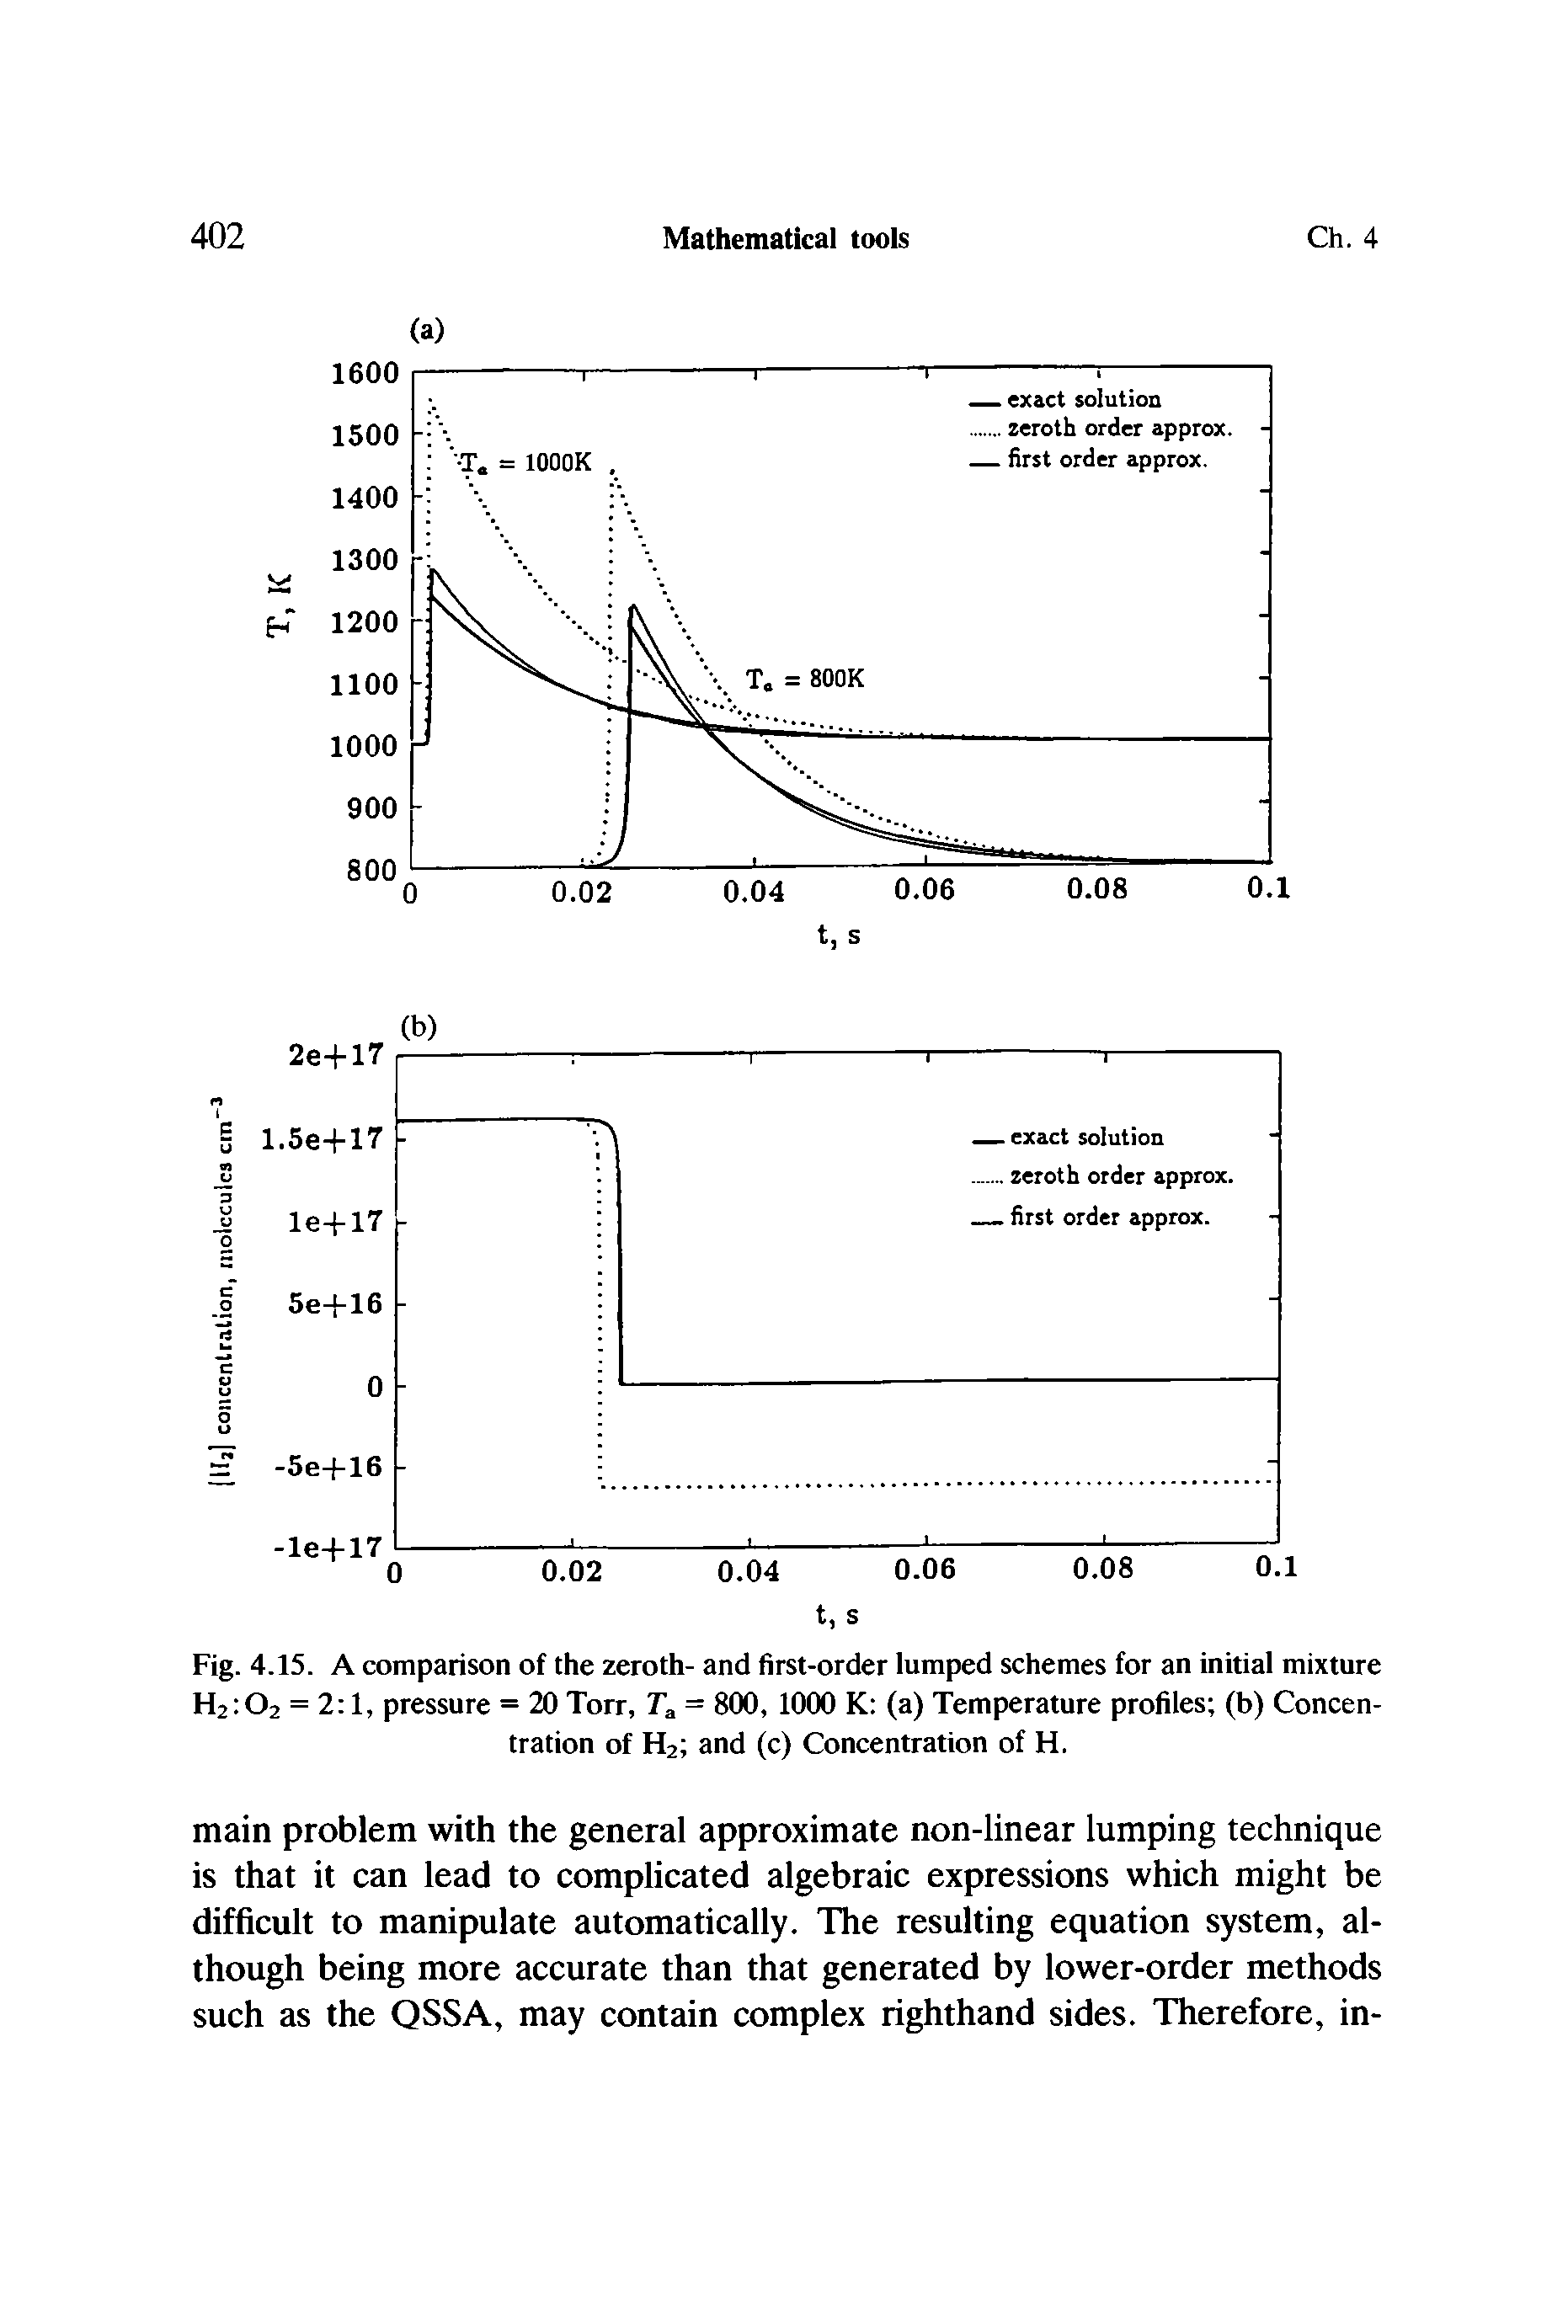 Fig. 4.15. A comparison of the zeroth- and first-order lumped schemes for an initial mixture H2 02 = 2 1, pressure = 20 Torr, = 800, 1000 K (a) Temperature profiles (b) Concentration of H2 and (c) Concentration of H.